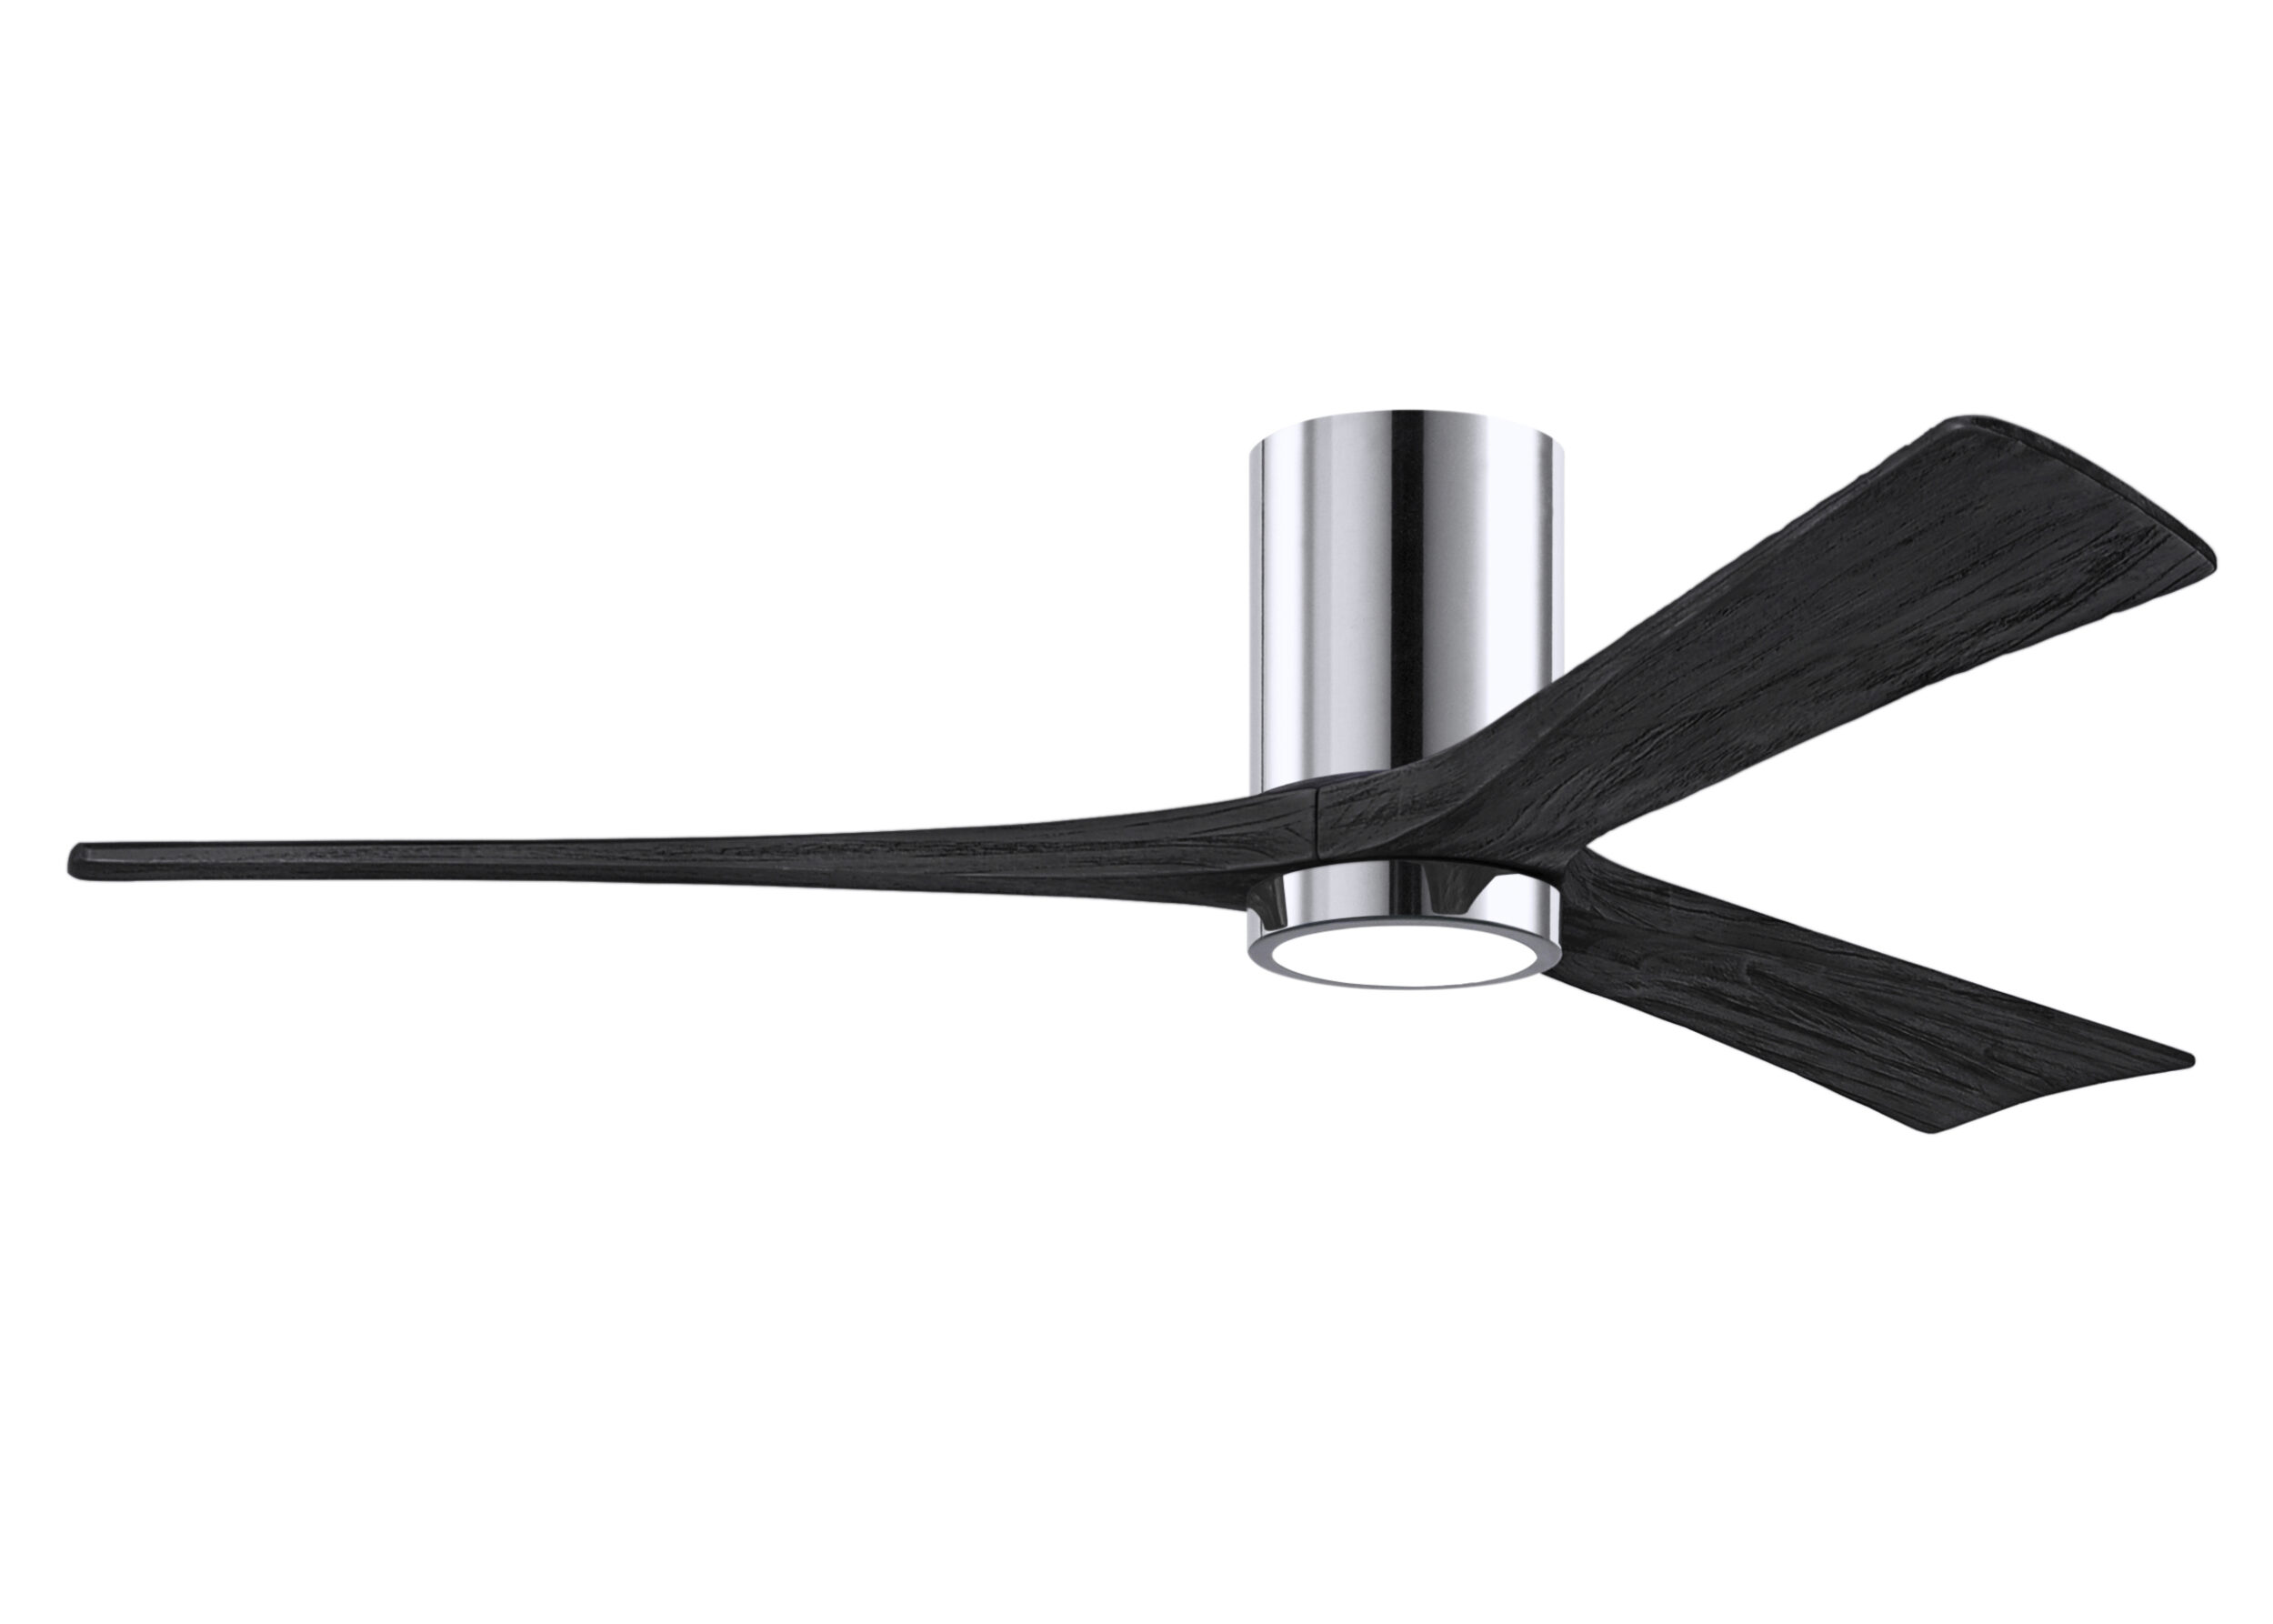 Irene-3HLK Ceiling Fan in Polished Chrome Finish with 60